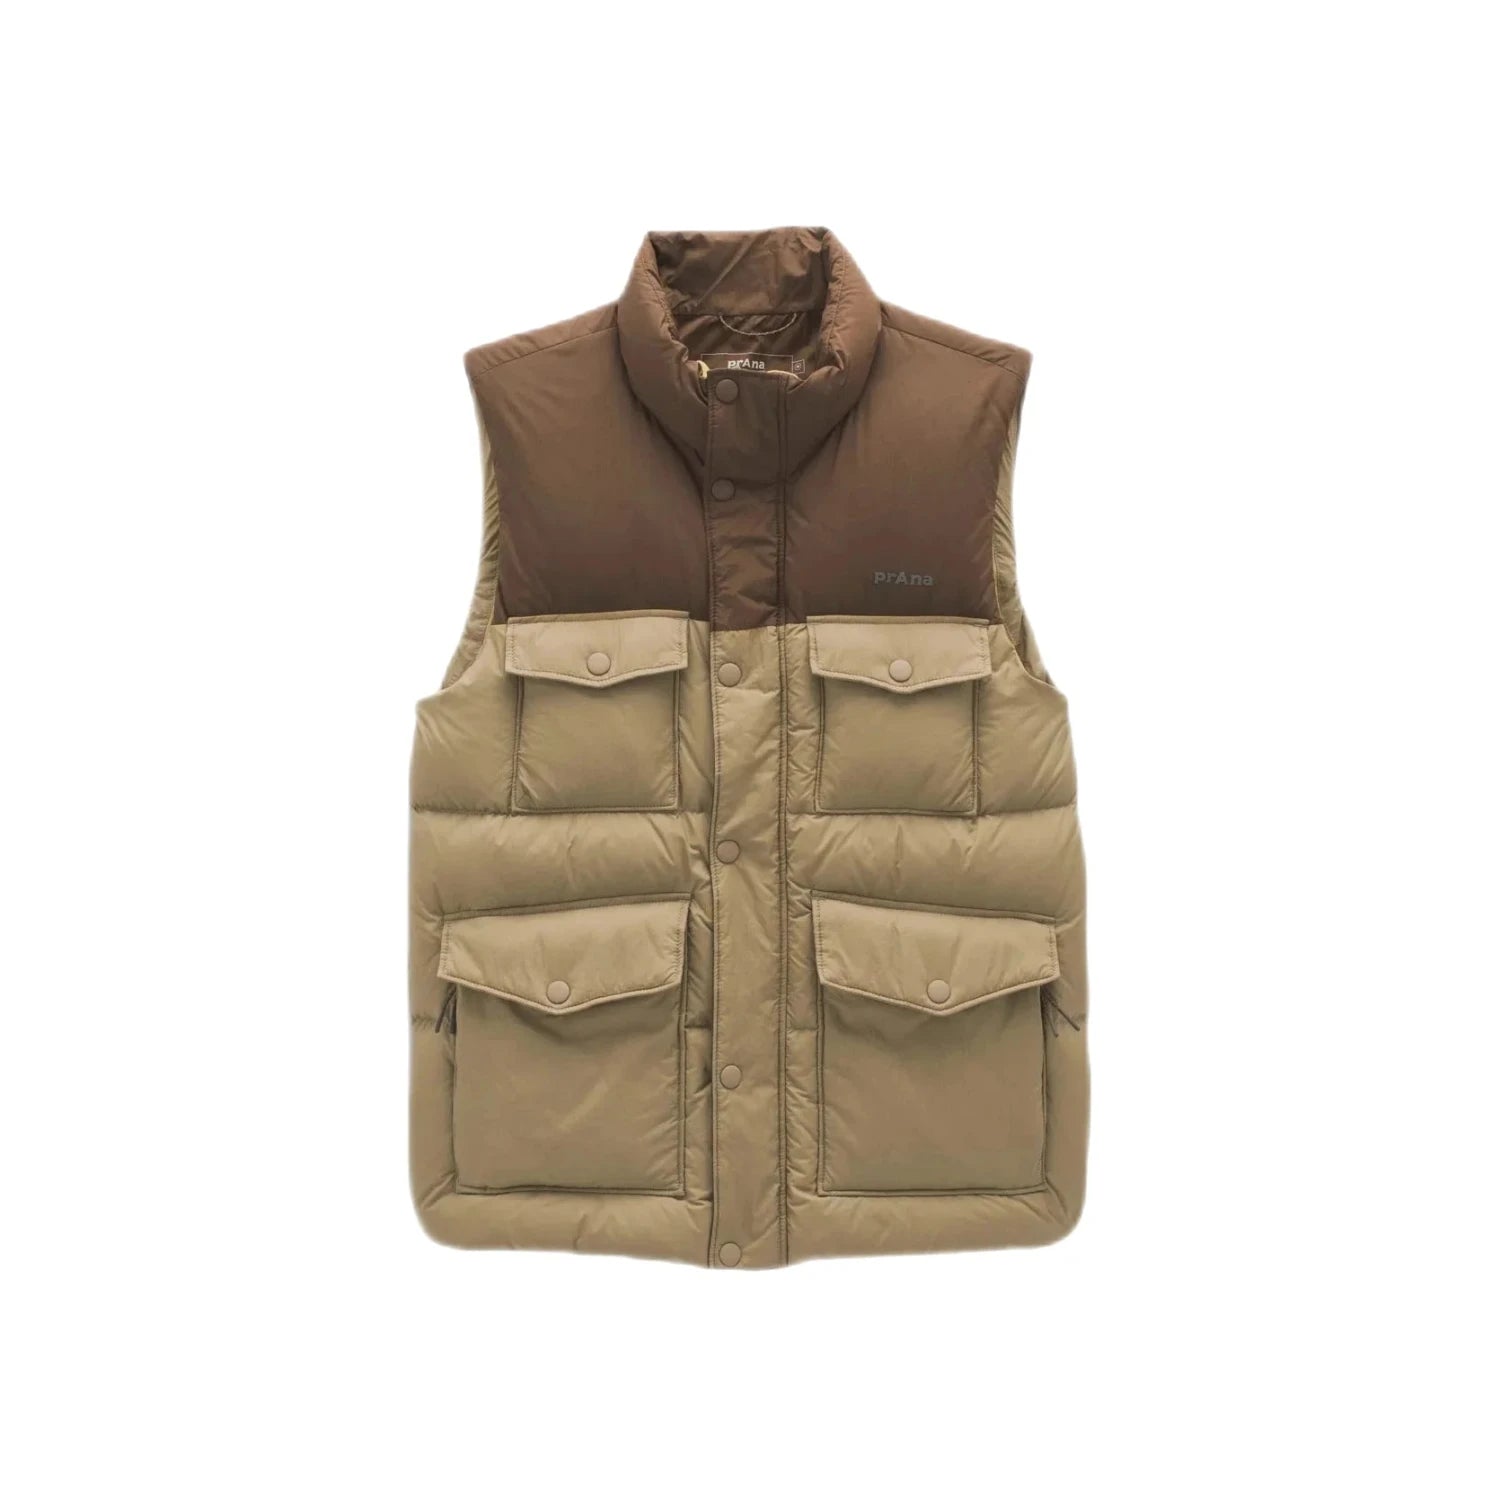 prAna Men's Timber Trail Vest shown in the Shire Colorblock color option. Front view.